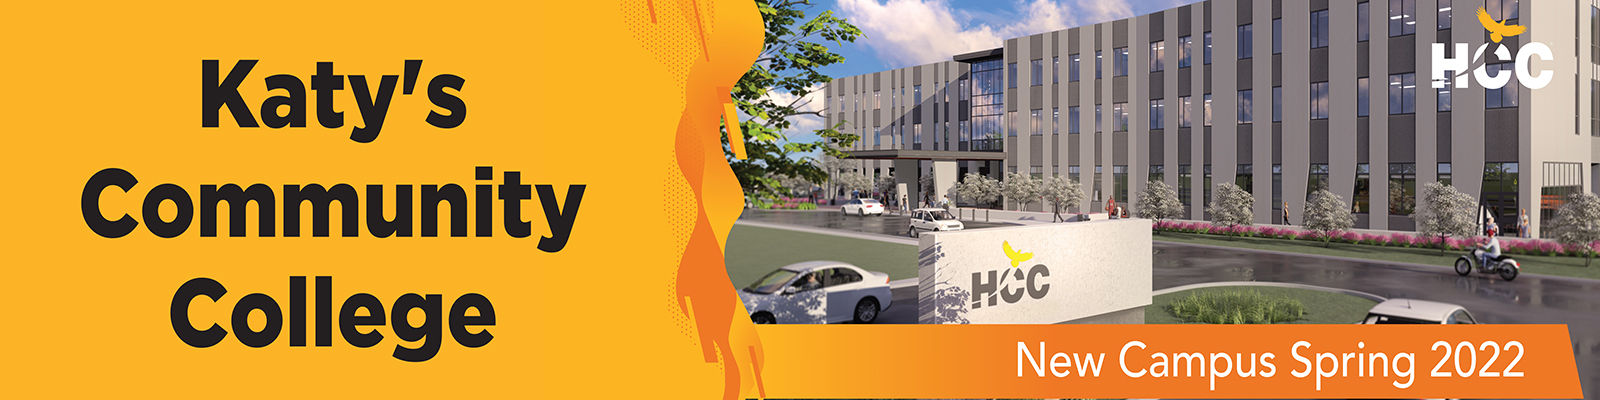 Banner image for HCC new katy campus